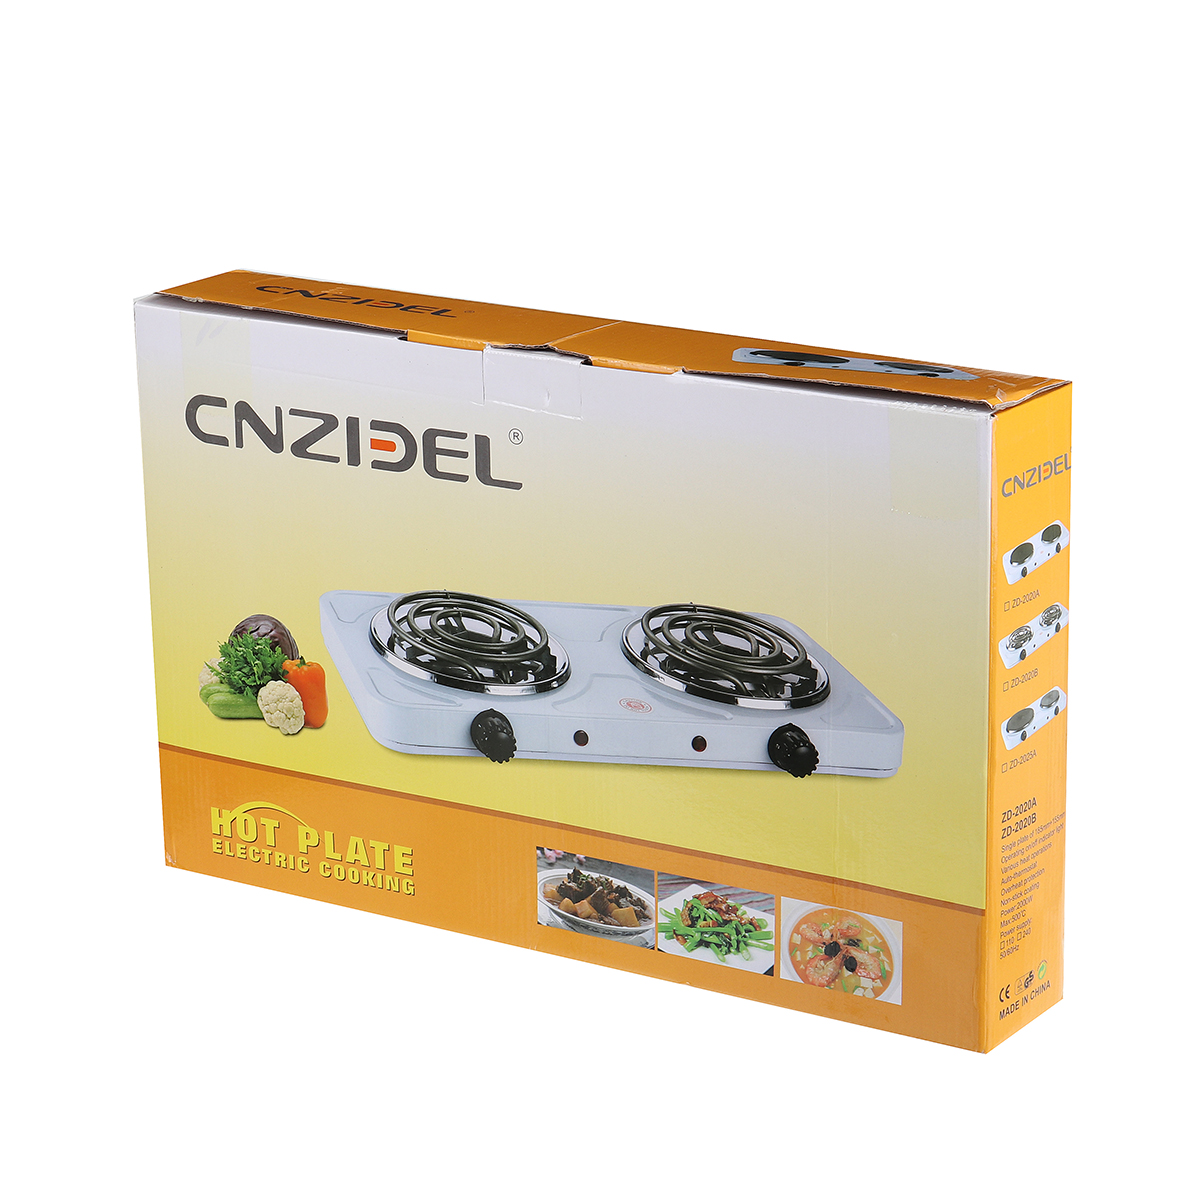 Find 110V 2000W Portable Double Electric Stove Burner Hot Plate Cooking Heater for Sale on Gipsybee.com with cryptocurrencies